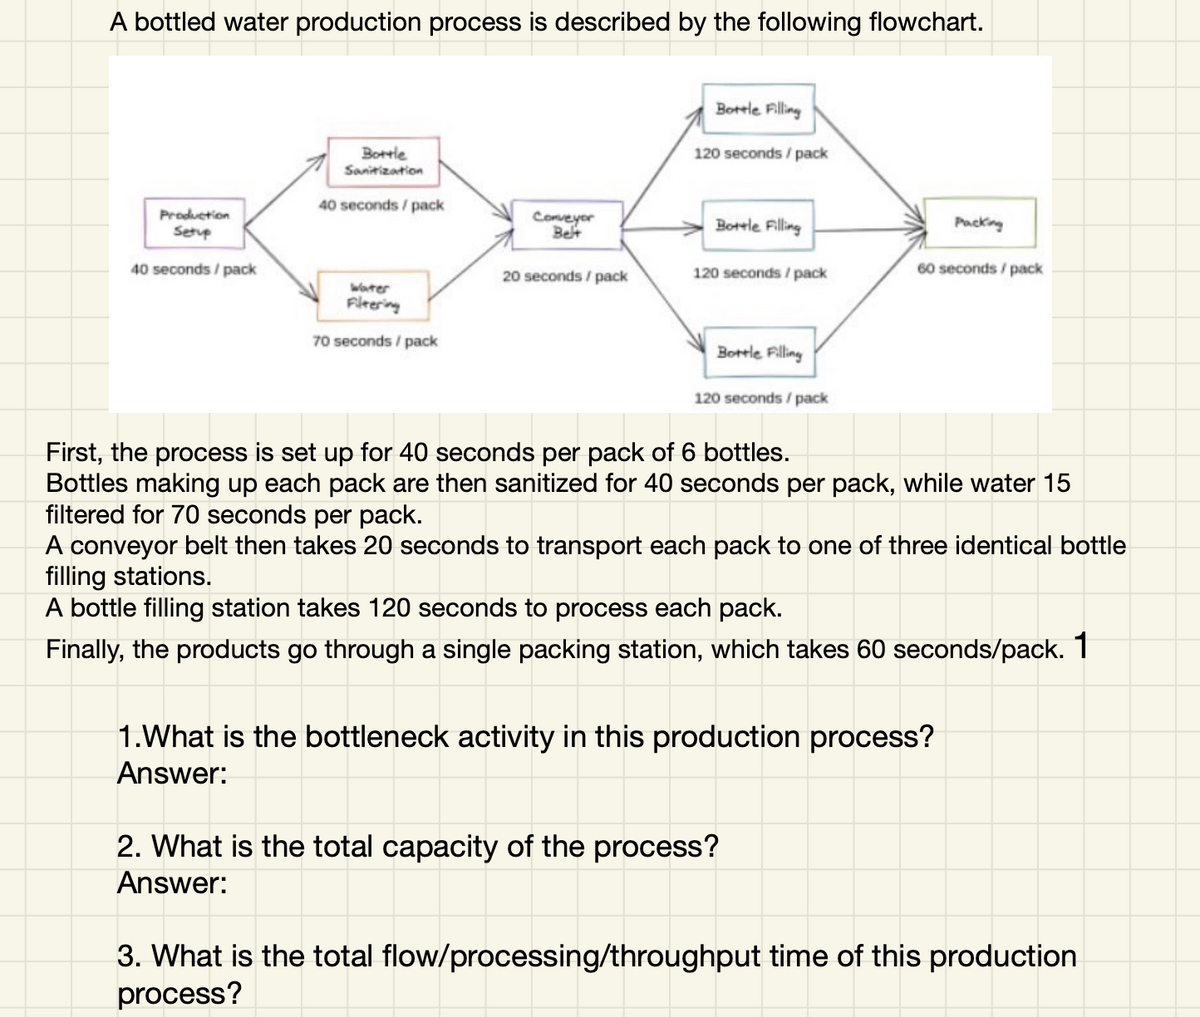 A bottled water production process is described by the following flowchart.
Production
Setup
40 seconds /pack
Bottle
Sanitization
40 seconds /pack
Water
Filtering
70 seconds /pack
Conveyor
Belt
20 seconds /pack
Bottle Filling
120 seconds /pack
Bottle Filling
120 seconds /pack
Bottle Filling
120 seconds /pack
Packing
60 seconds /pack
First, the process is set up for 40 seconds per pack of 6 bottles.
Bottles making up each pack are then sanitized for 40 seconds per pack, while water 15
filtered for 70 seconds per pack.
A conveyor belt then takes 20 seconds to transport each pack to one of three identical bottle
filling stations.
A bottle filling station takes 120 seconds to process each pack.
Finally, the products go through a single packing station, which takes 60 seconds/pack. 1
1.What is the bottleneck activity in this production process?
Answer:
2. What is the total capacity of the process?
Answer:
3. What is the total flow/processing/throughput time of this production
process?